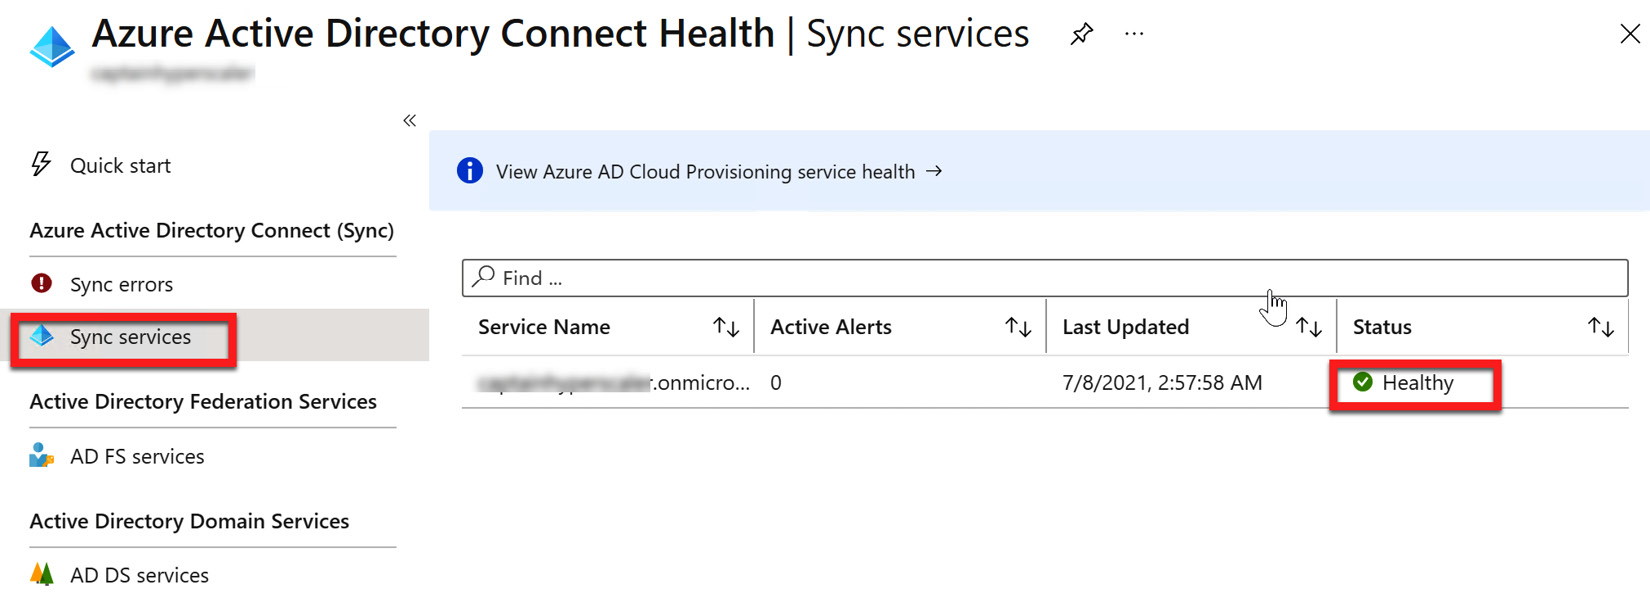 Figure 6.34 – Azure AD Connect Health Agent sync services' status
